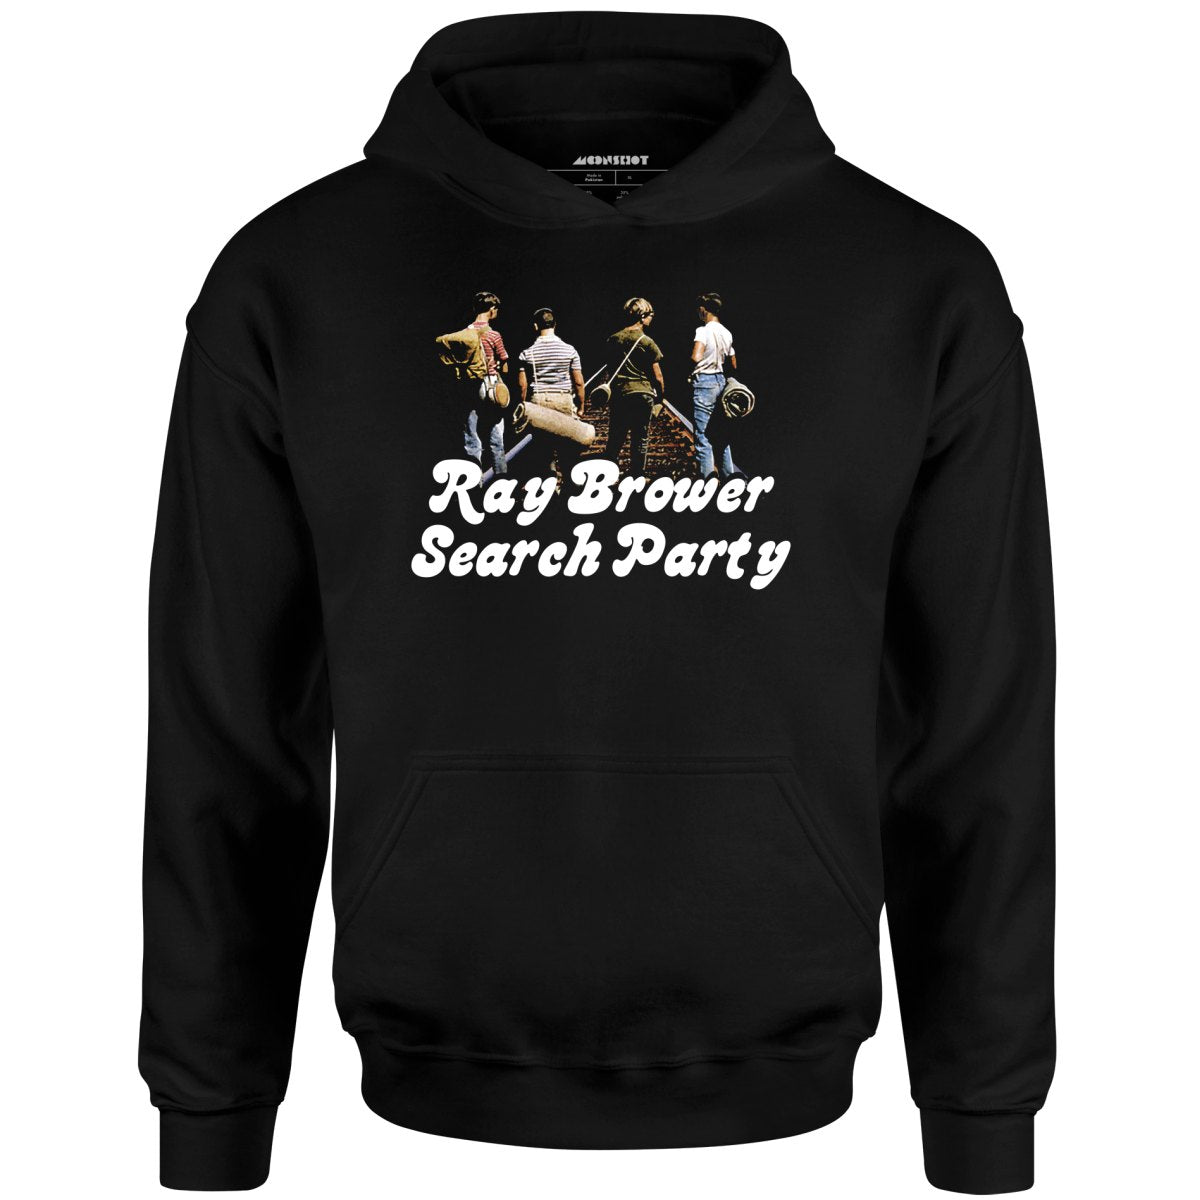 Ray Brower Search Party - Unisex Hoodie